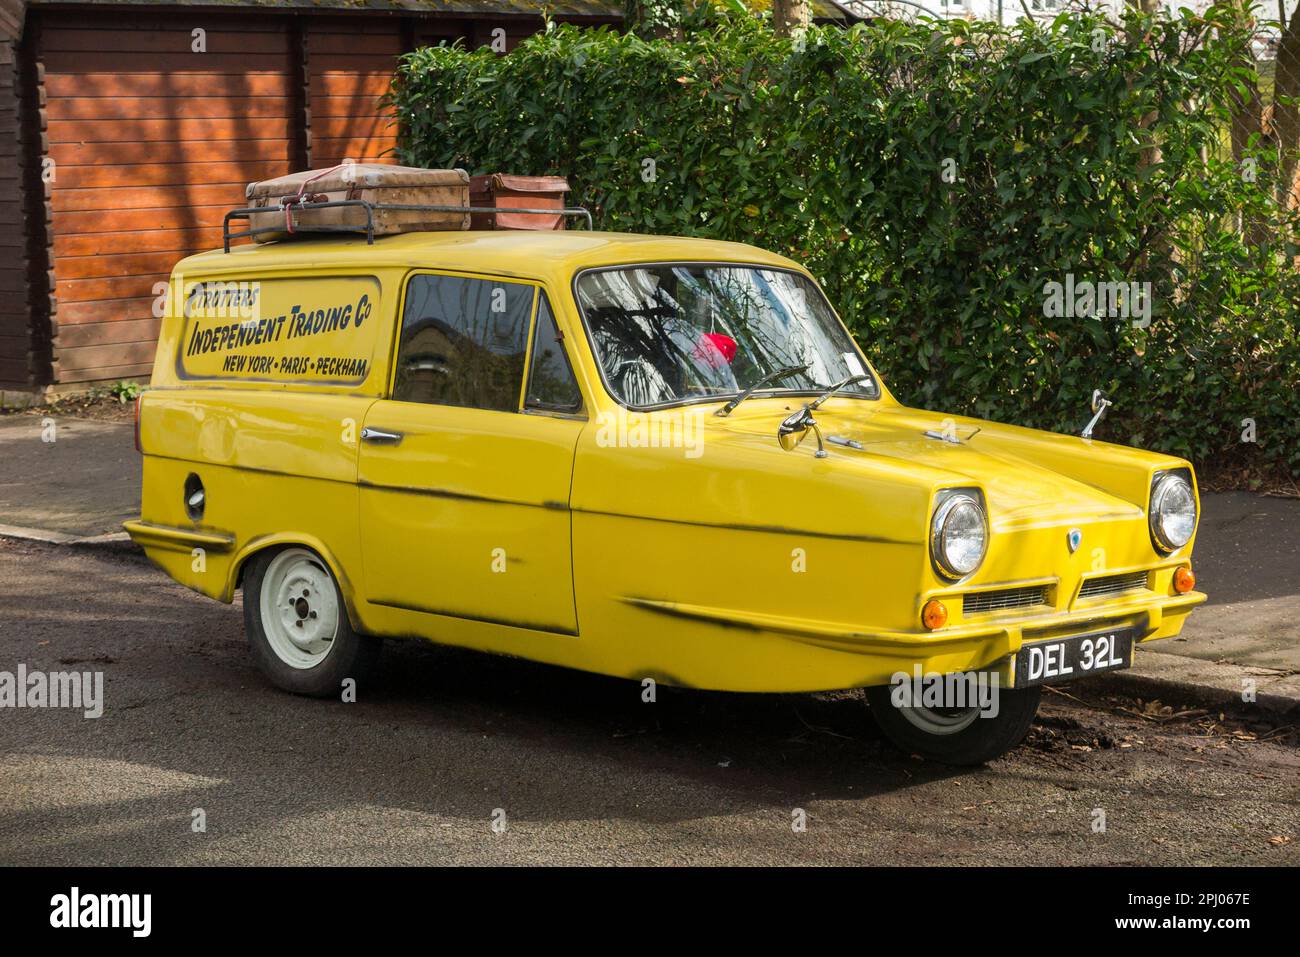 Tribute classic car 'copy' of Del Boy's Reliant Regal (1968 model in the TV series) yellow van from Only Fools and Horses television programme. (133) Stock Photo